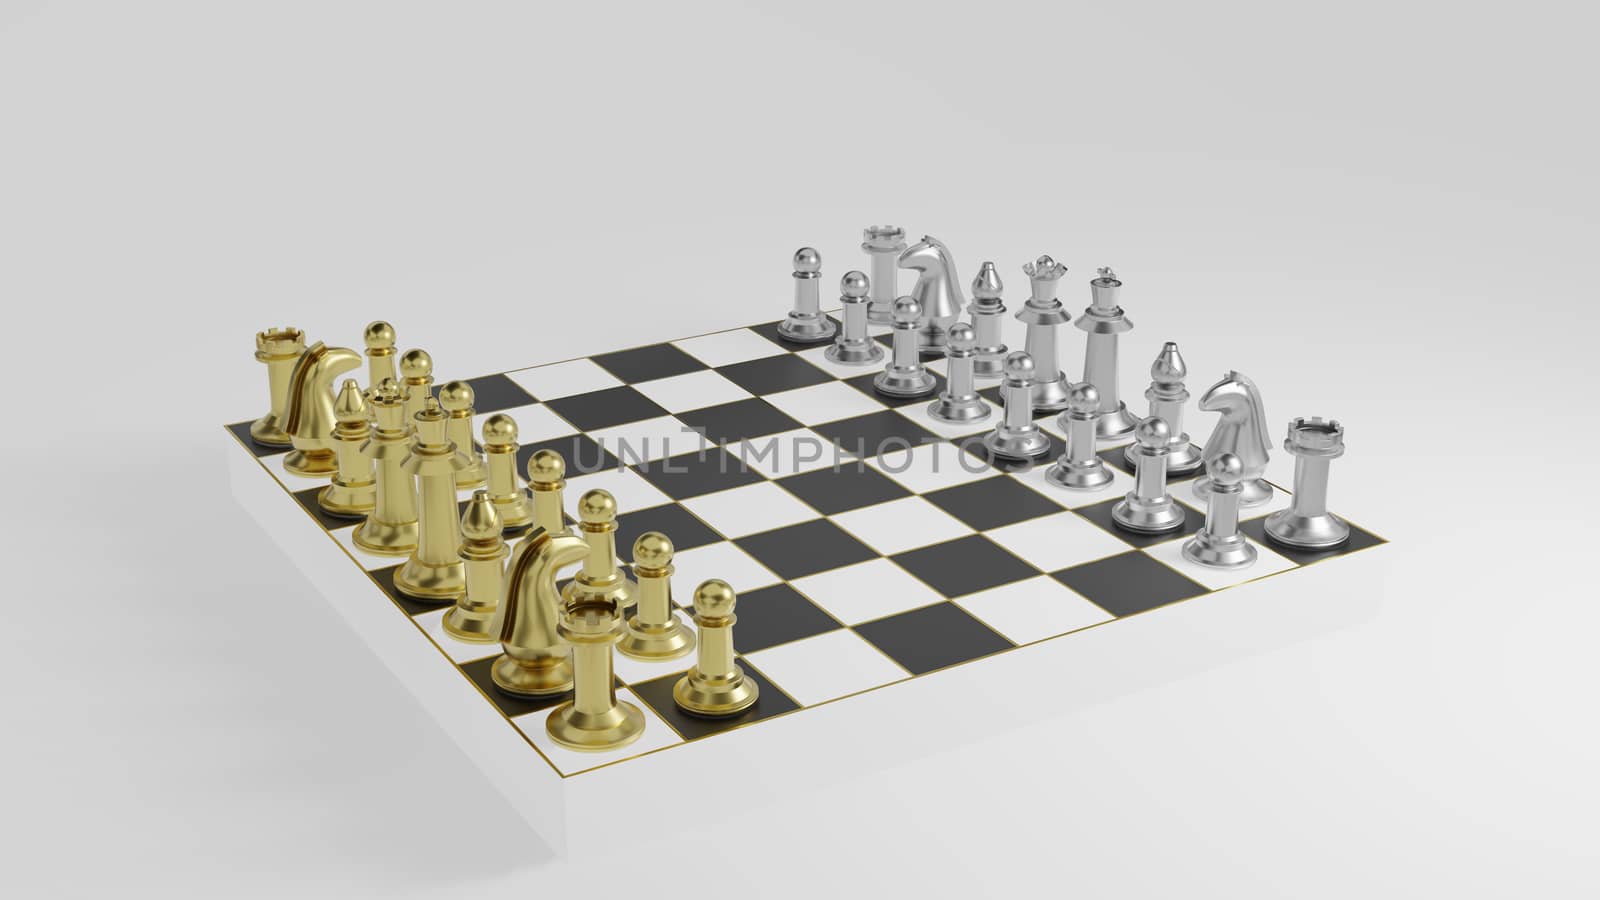 Golden and silver chess pieces on black and white board by eaglesky